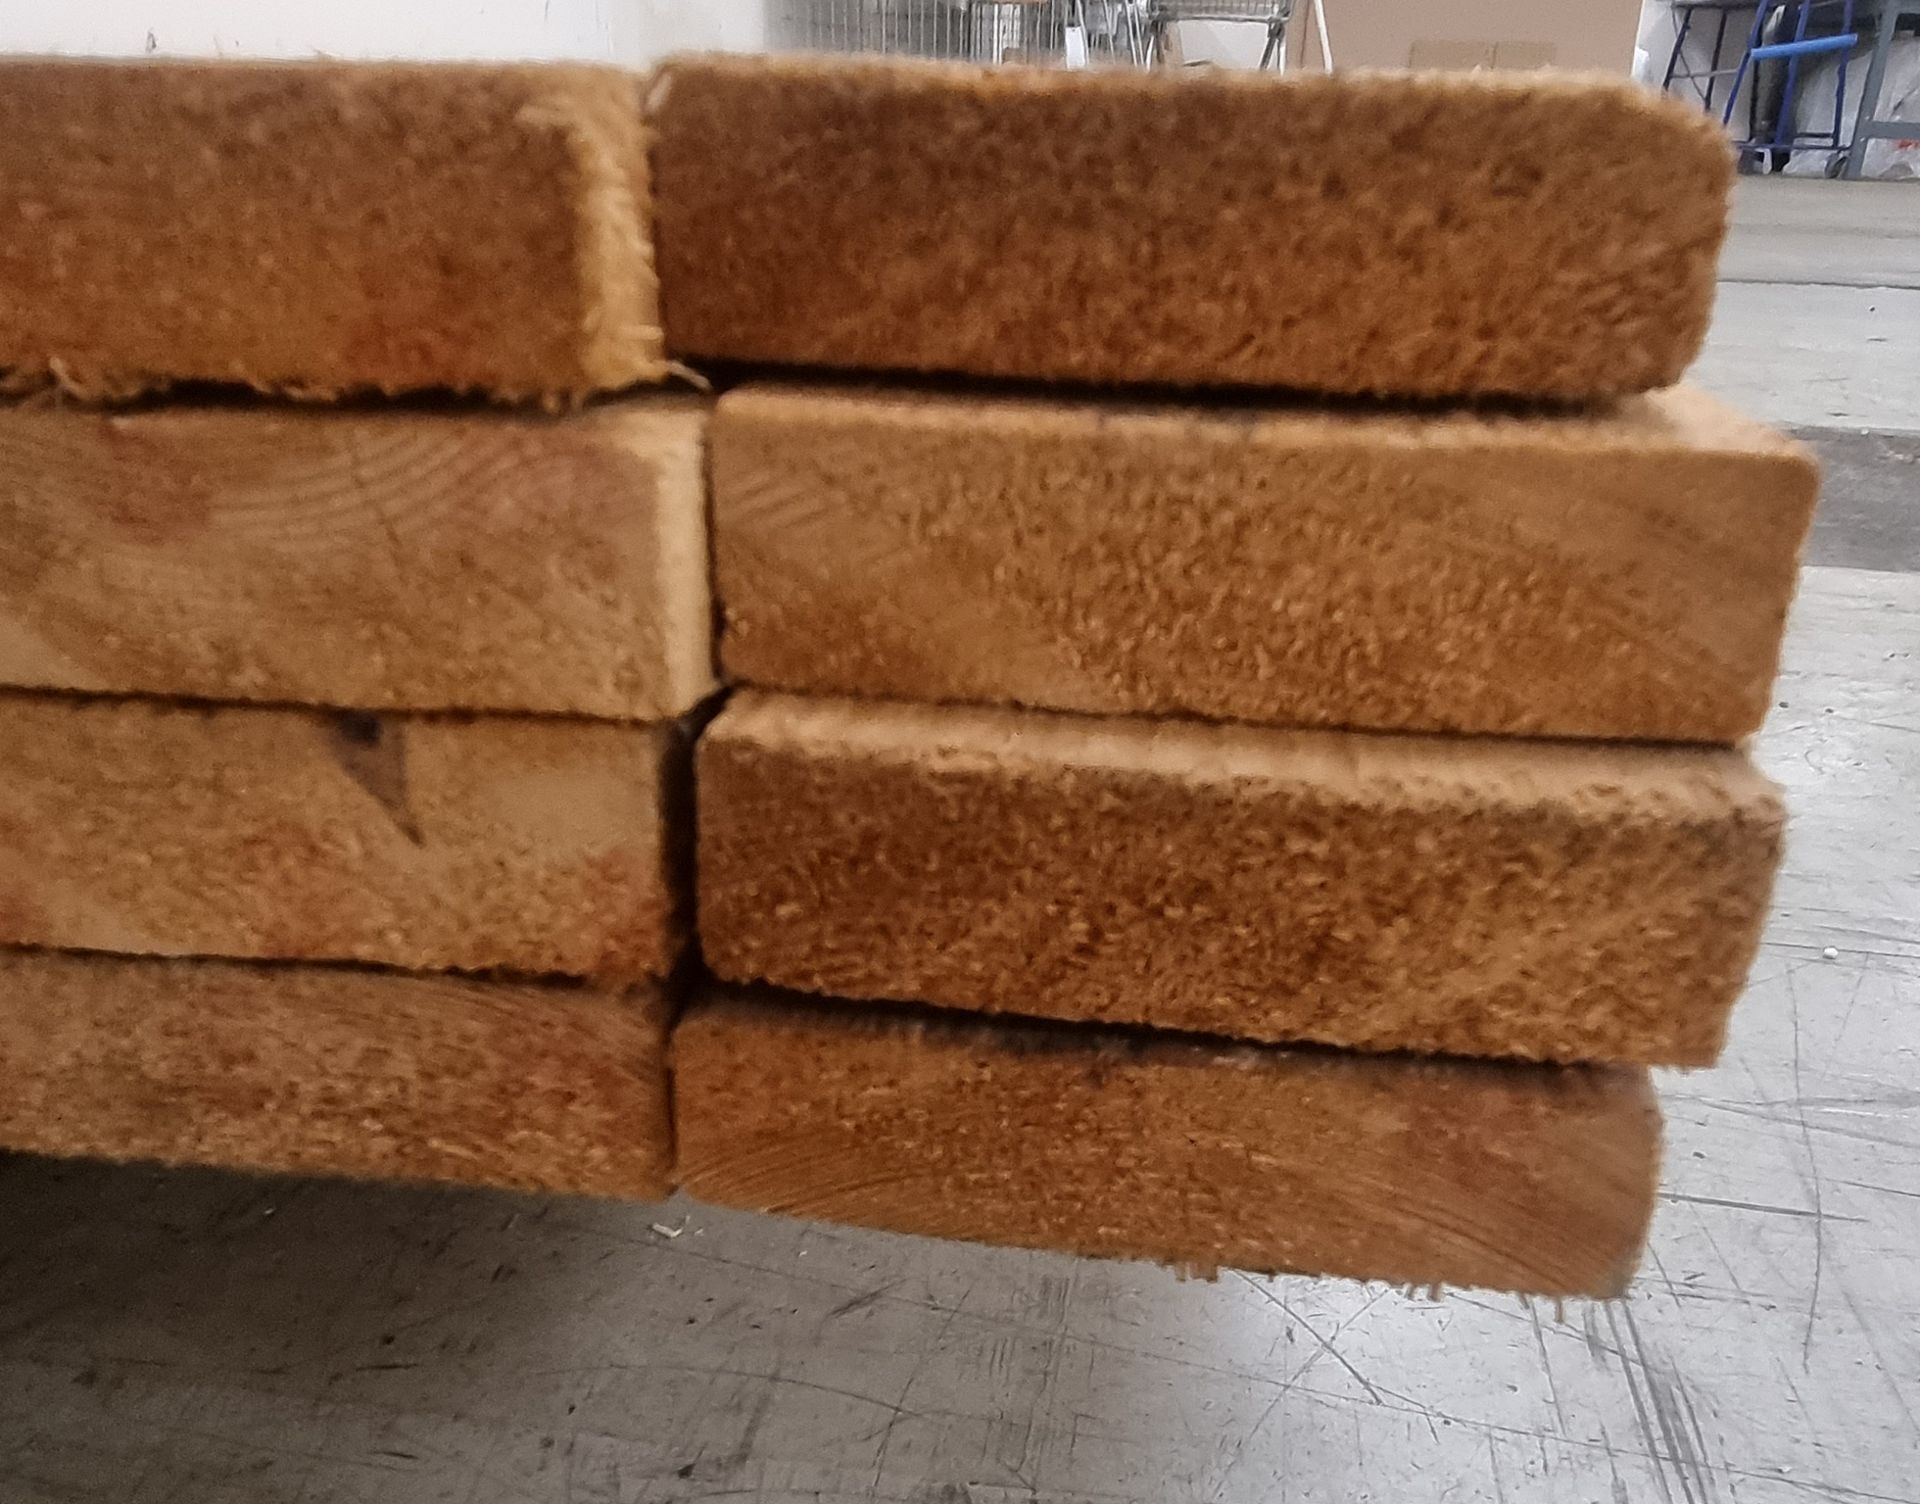 Pallet of 4"x1" softwood various lengths & Pallet of 4"x1" softwood 44pcs - Image 5 of 9